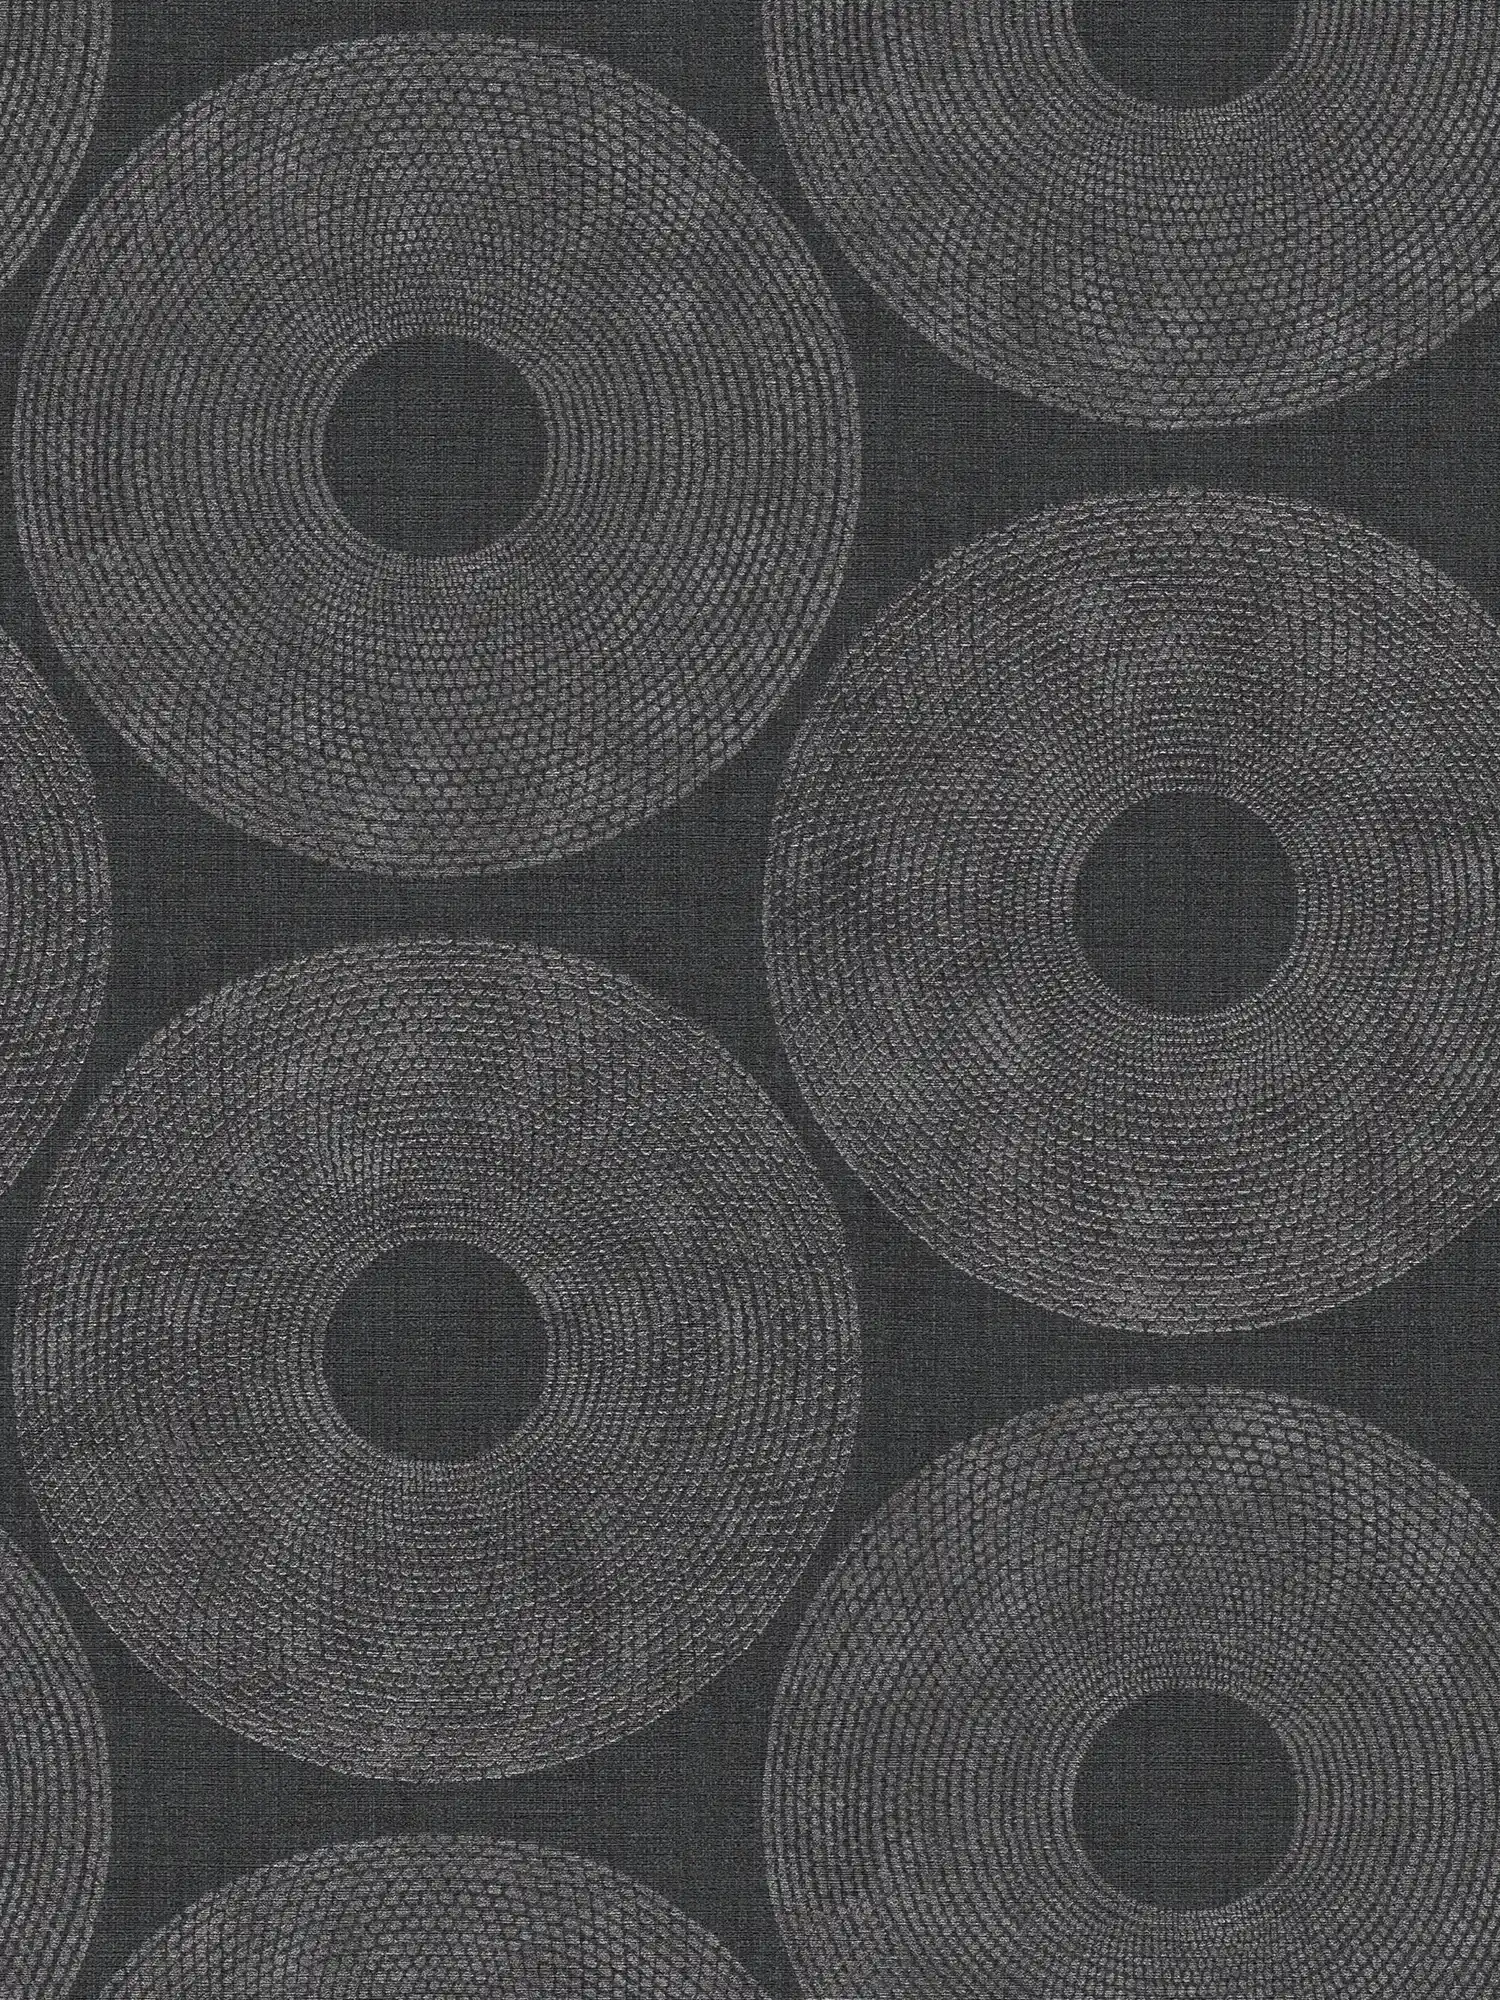         Ethno wallpaper circles with structure design - grey, metallic
    